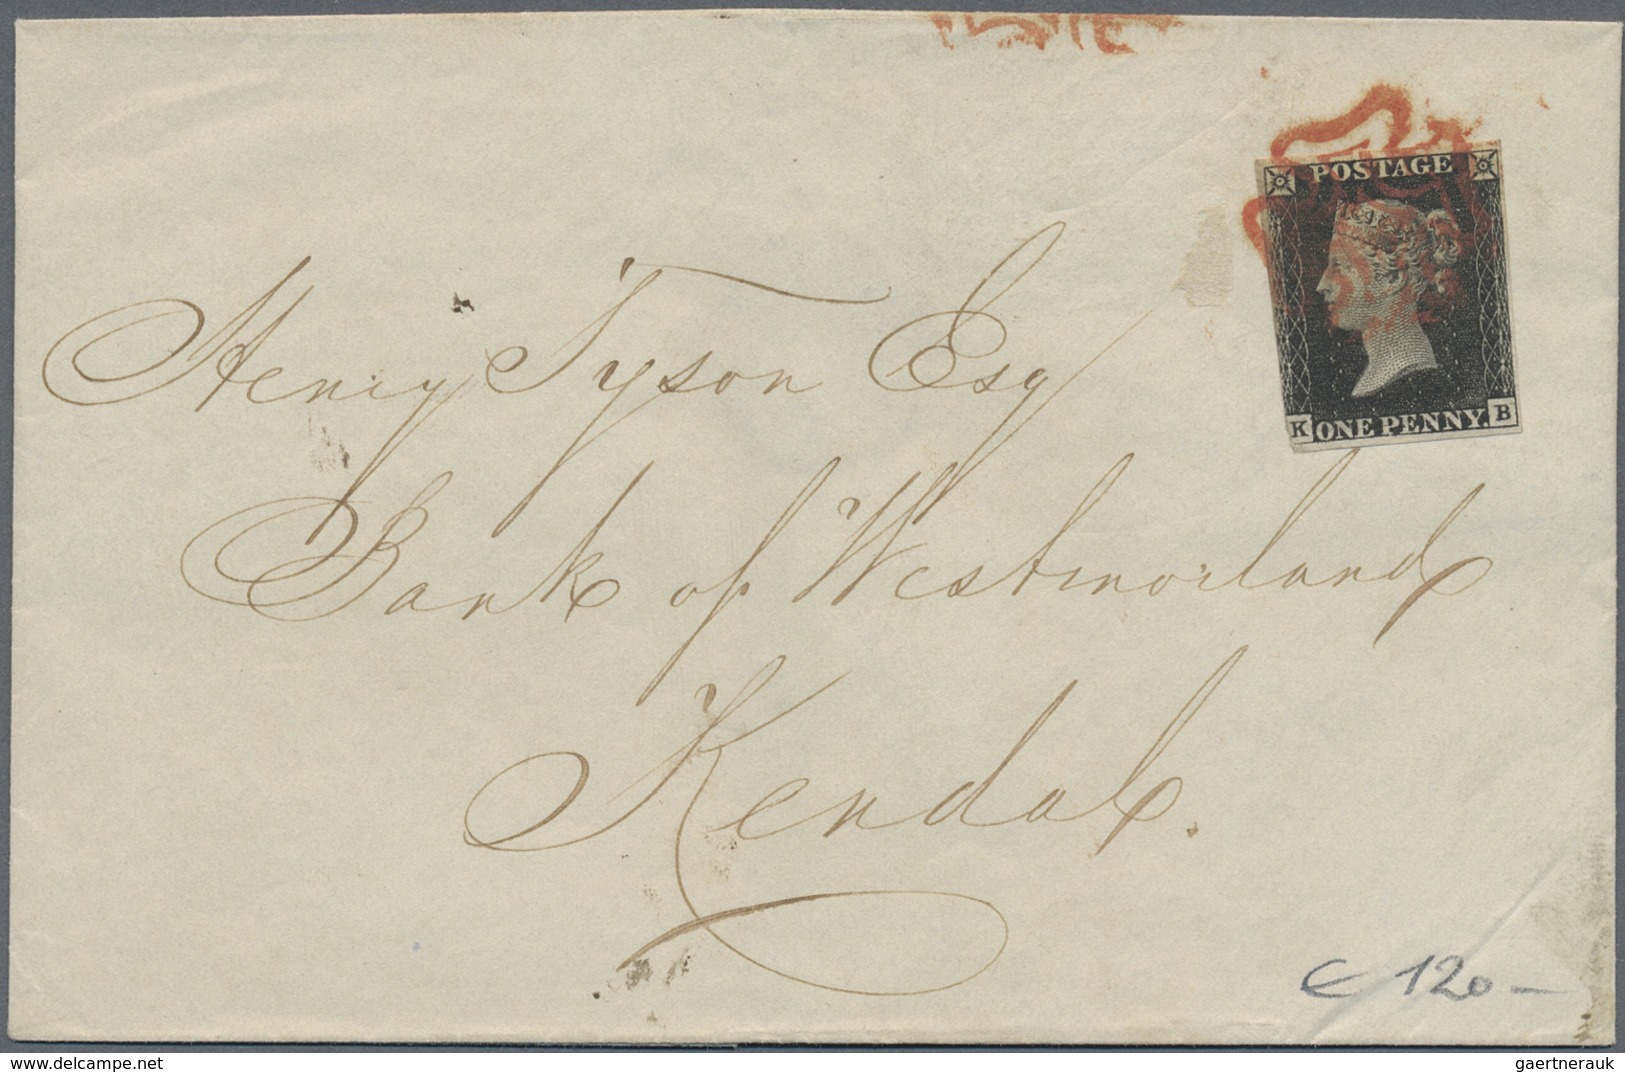 Br Großbritannien: 1841/1890 (ca): Queen Victoria: 217 letters, covers and postal stationary in a SAFE